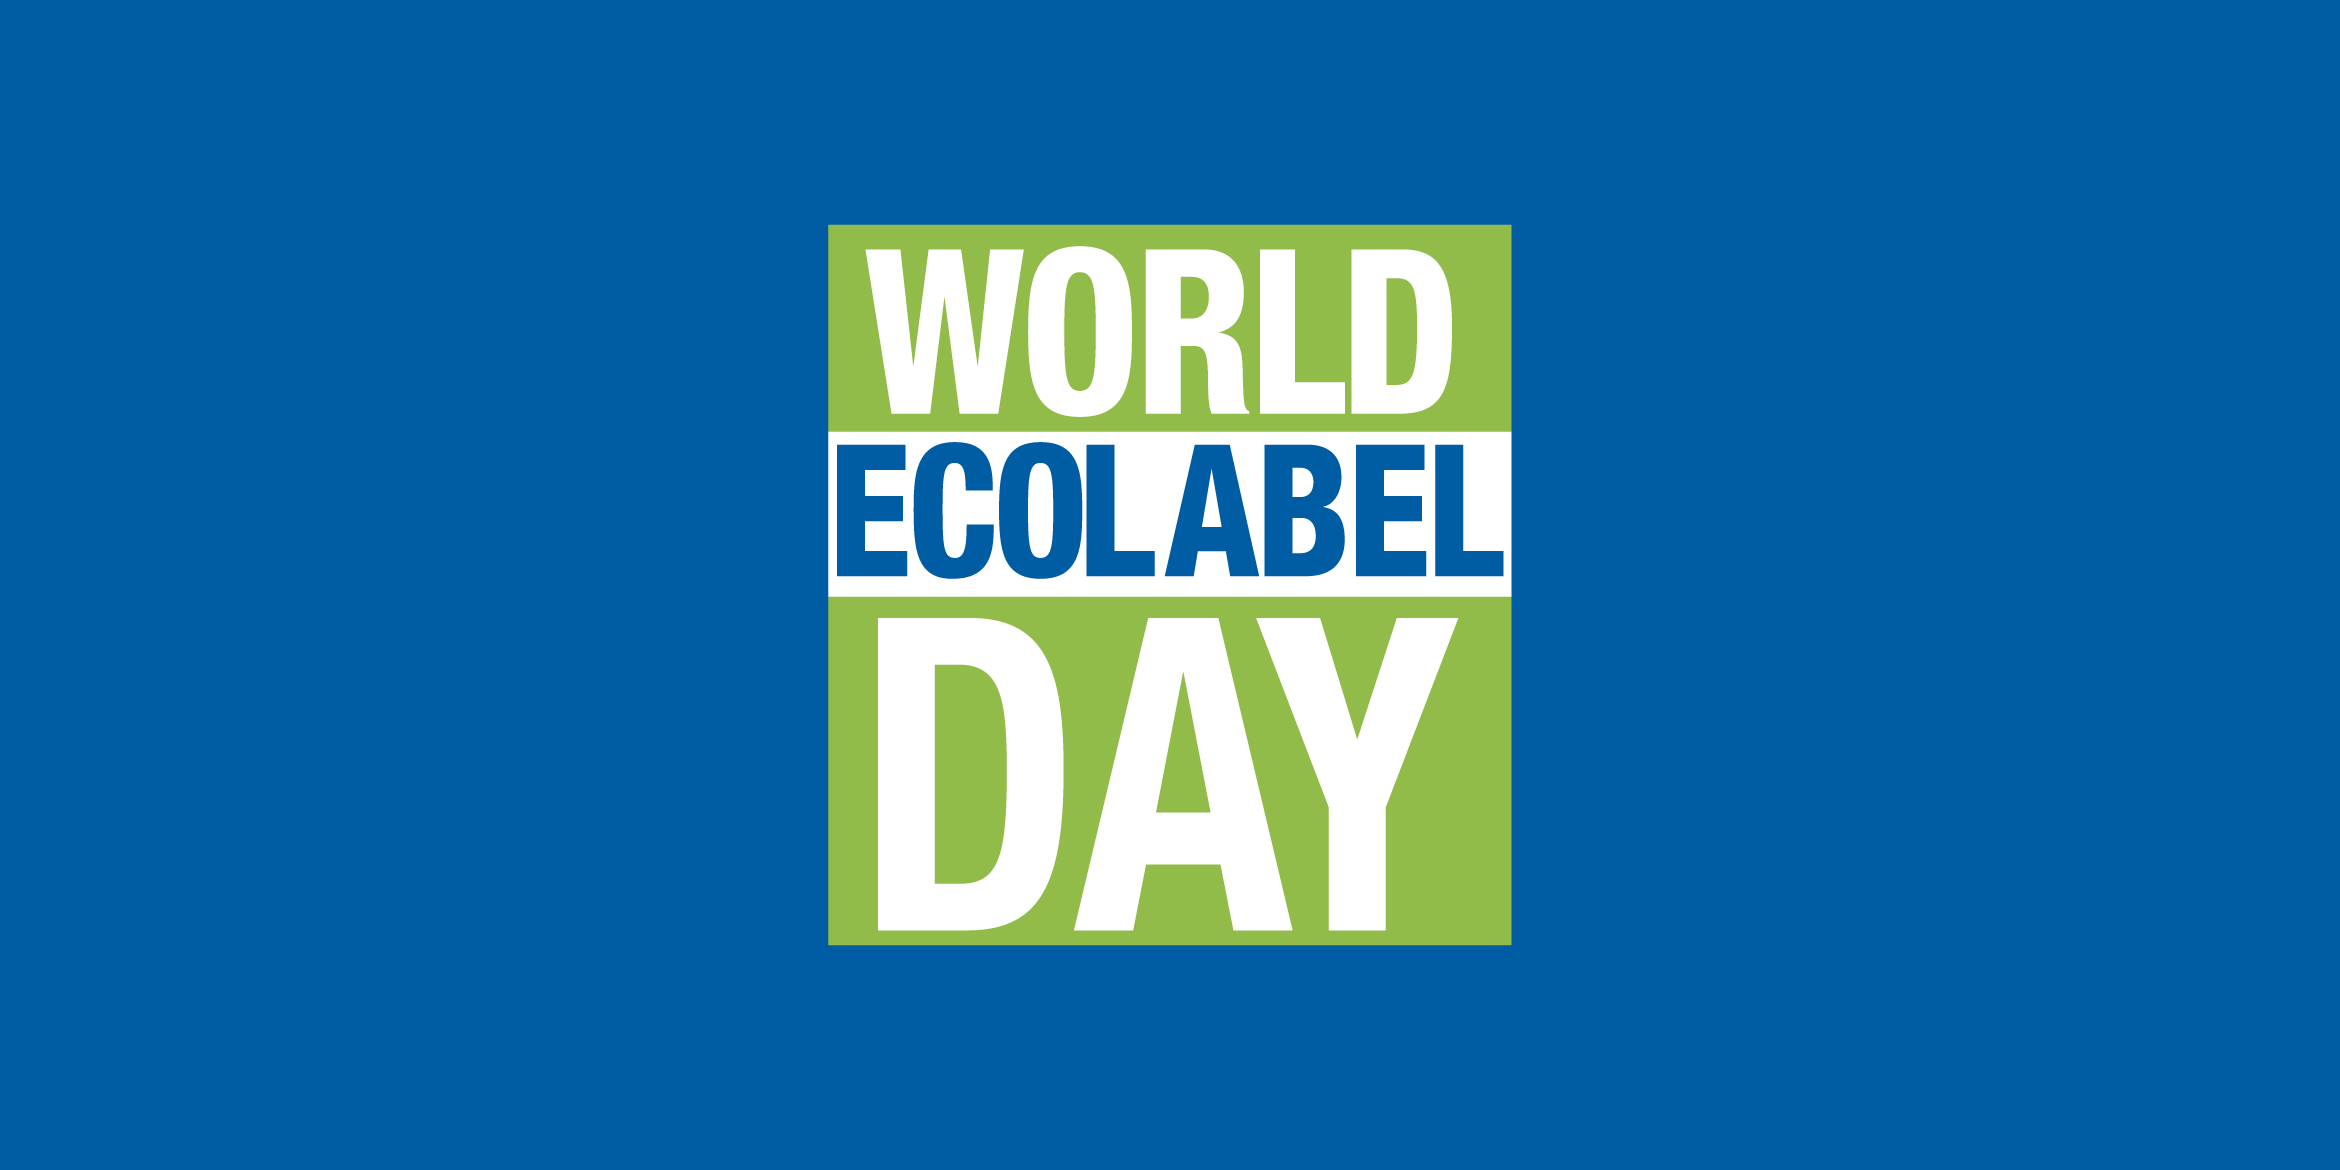 World Ecolabel Day: Succeed with sustainable procurement